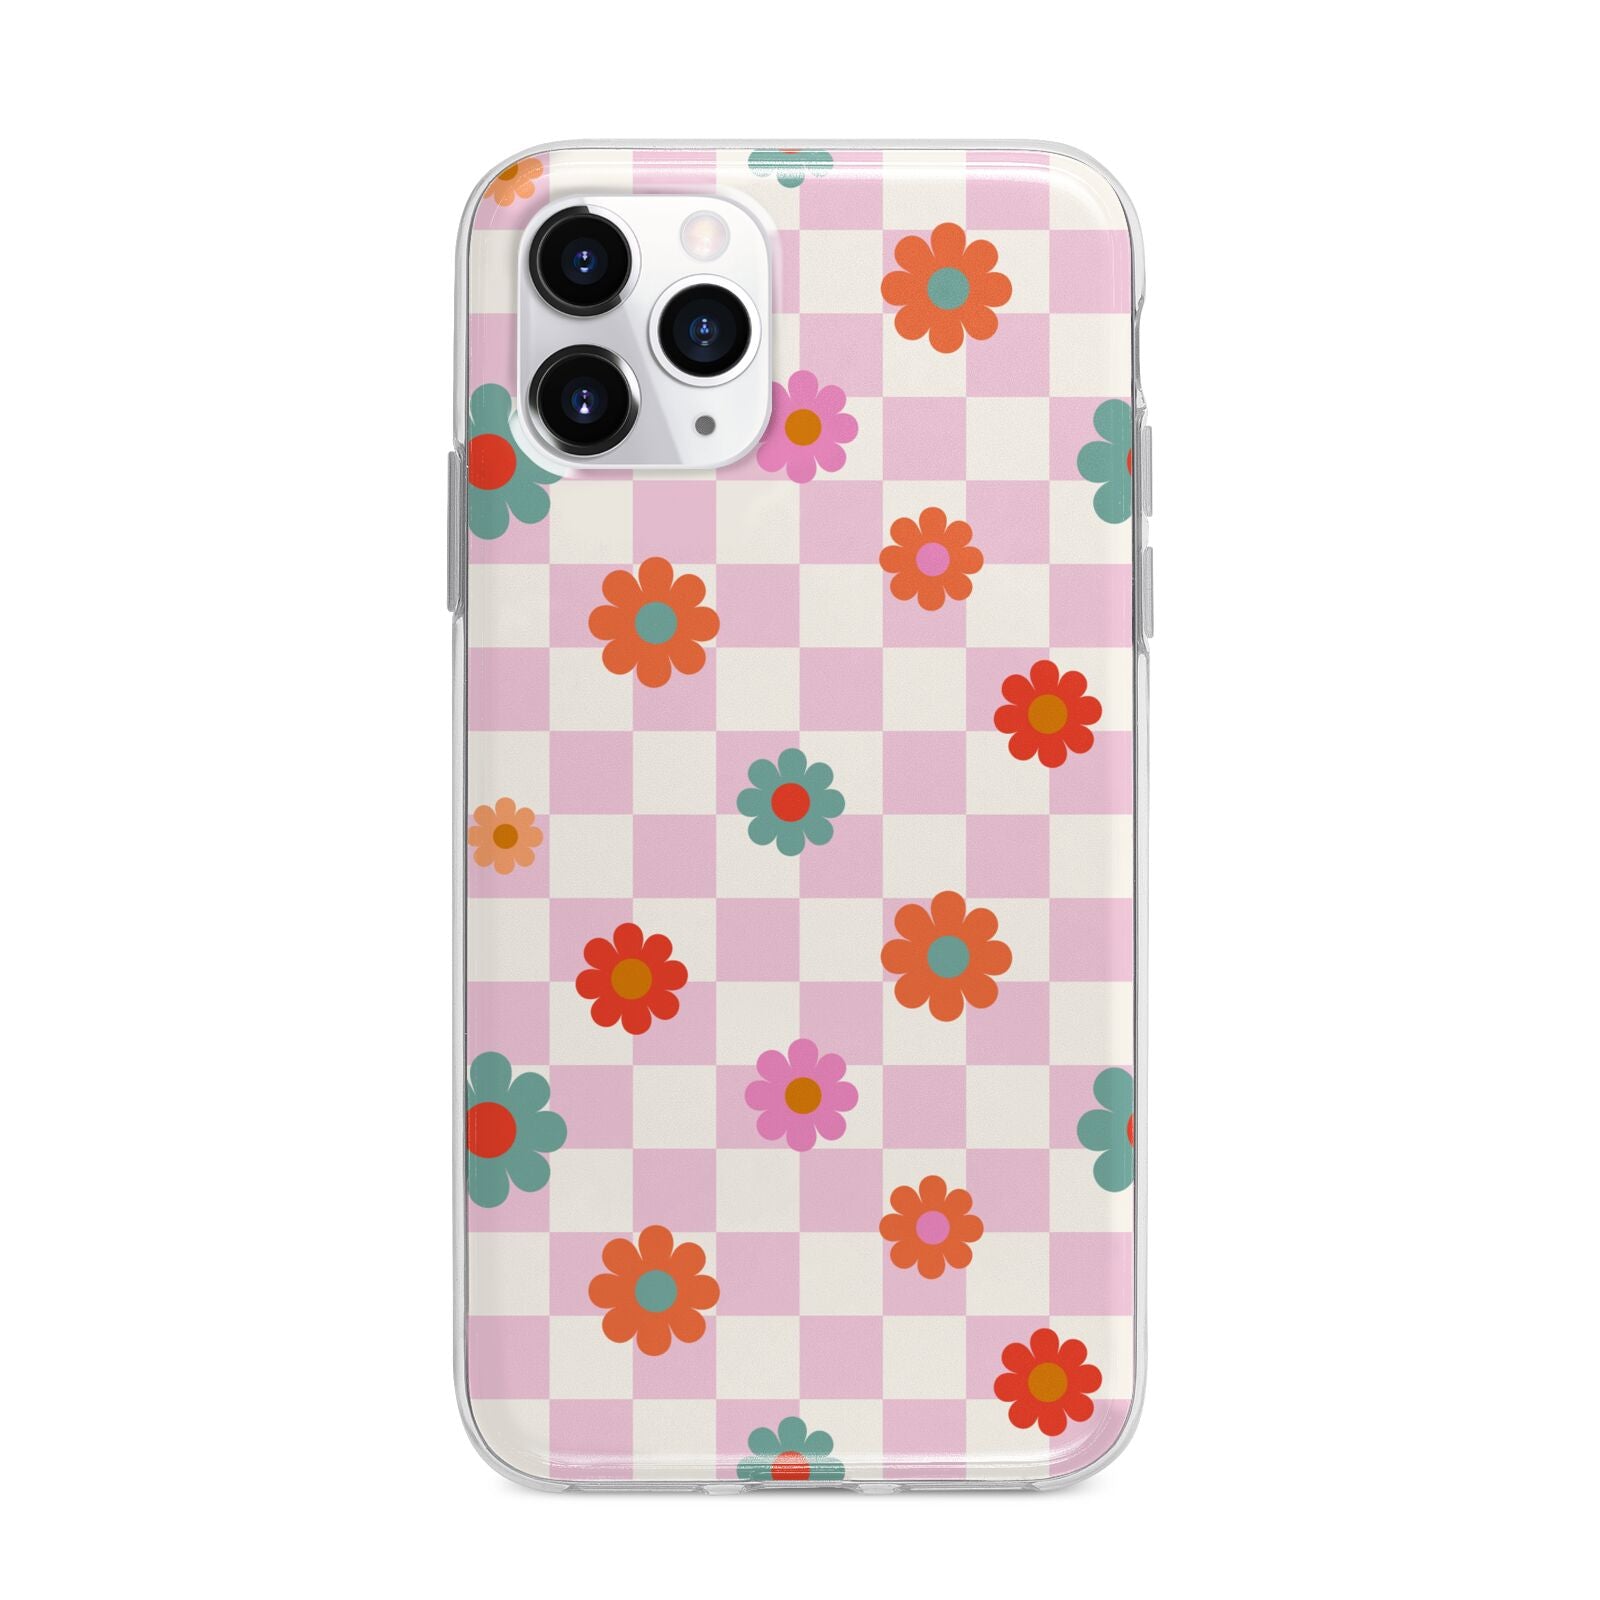 Flower Power Apple iPhone 11 Pro Max in Silver with Bumper Case